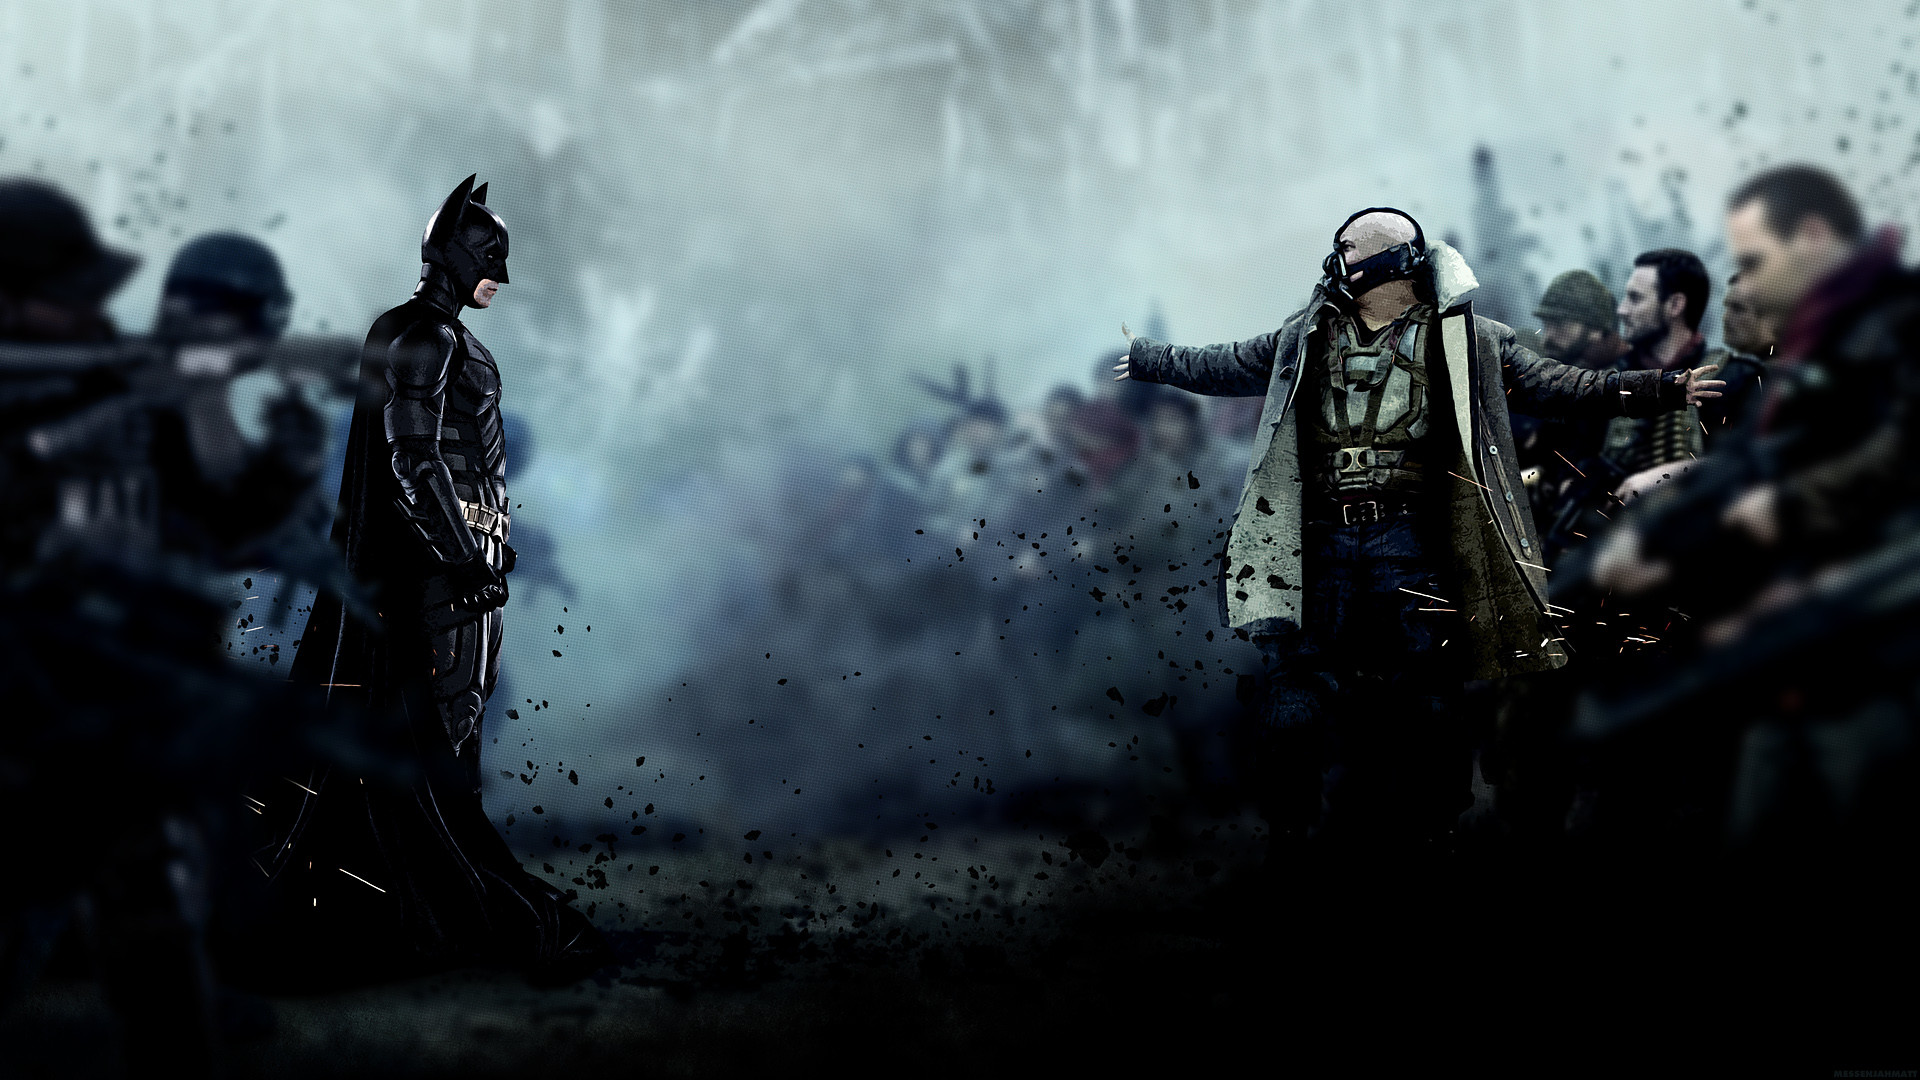 1920x1080 The Dark Knight Rises: Christopher Nolan, Cinematography by Wally Pfister